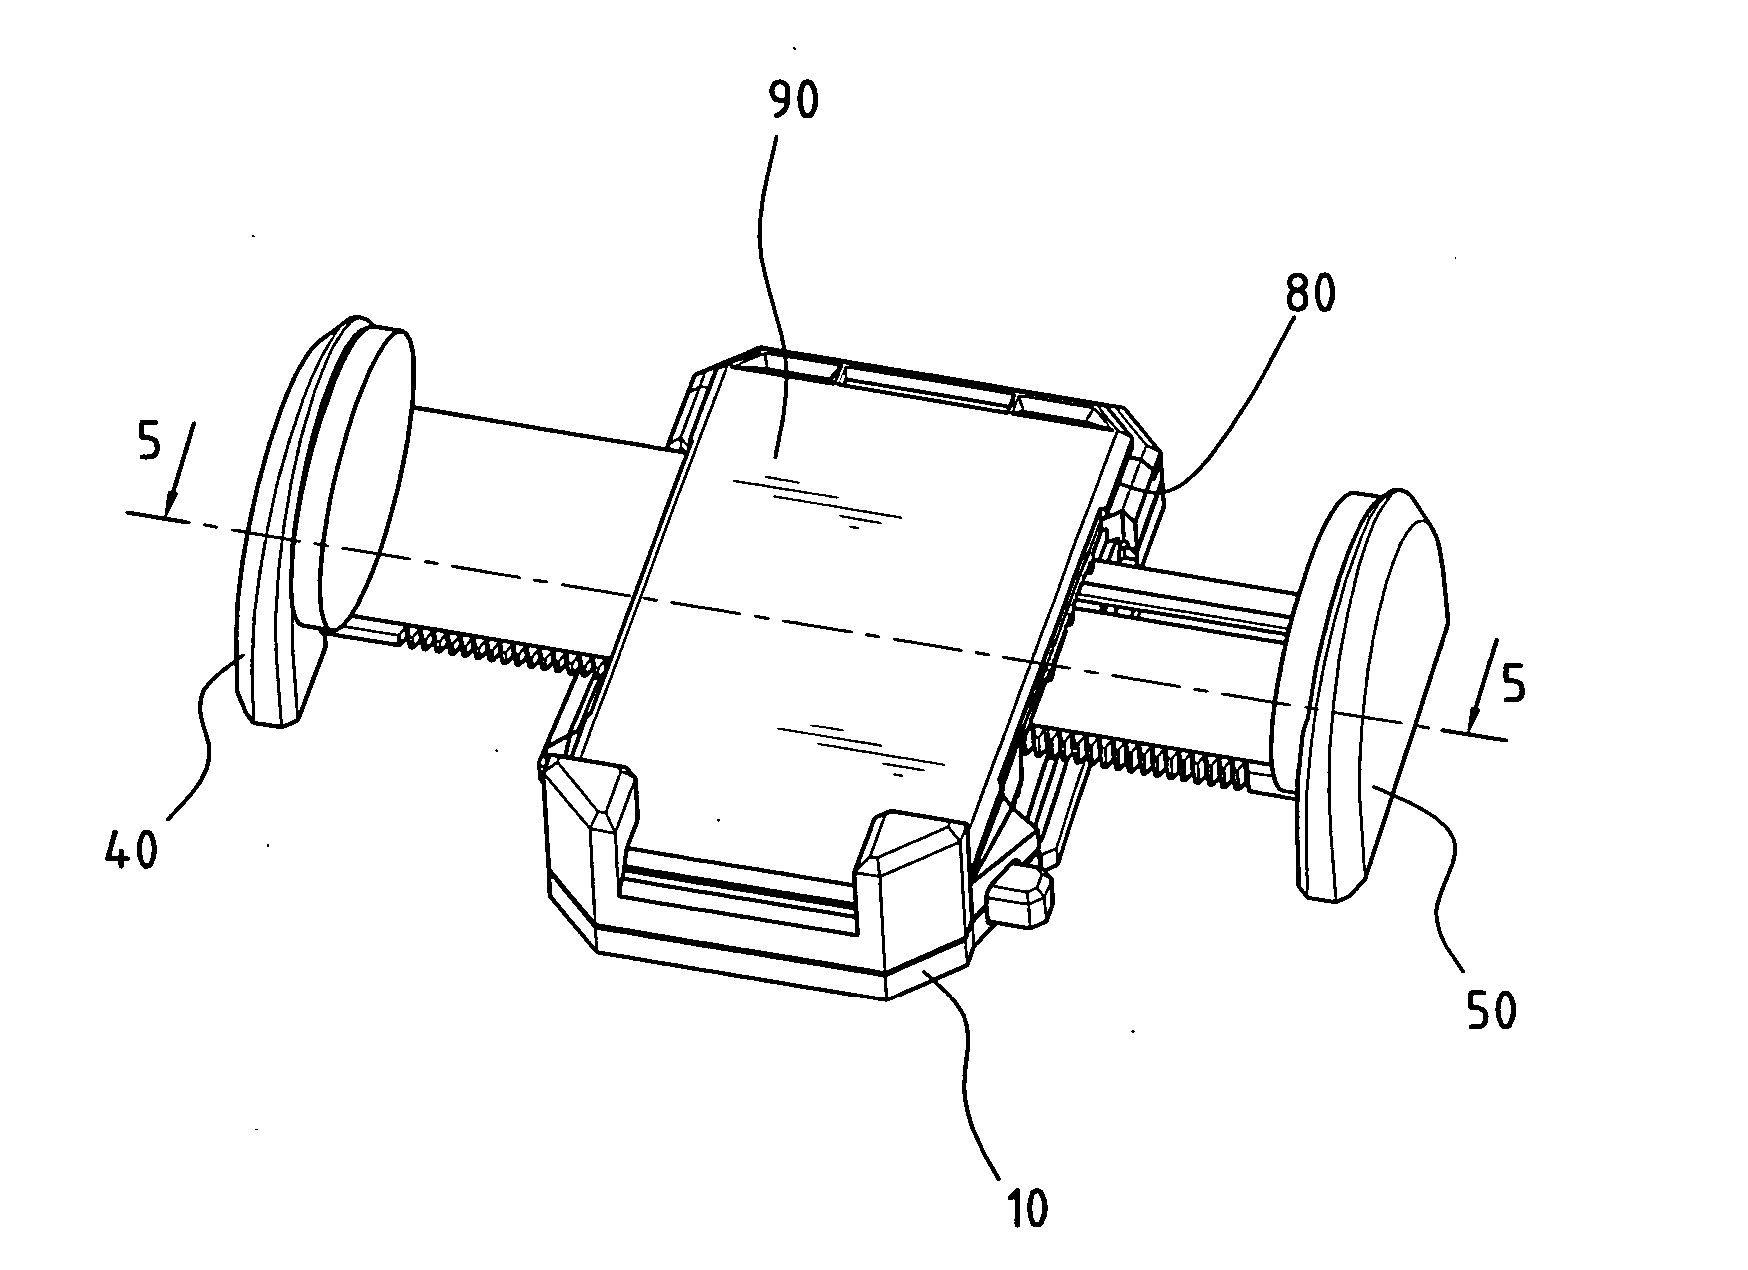 Electronic appliance holding device